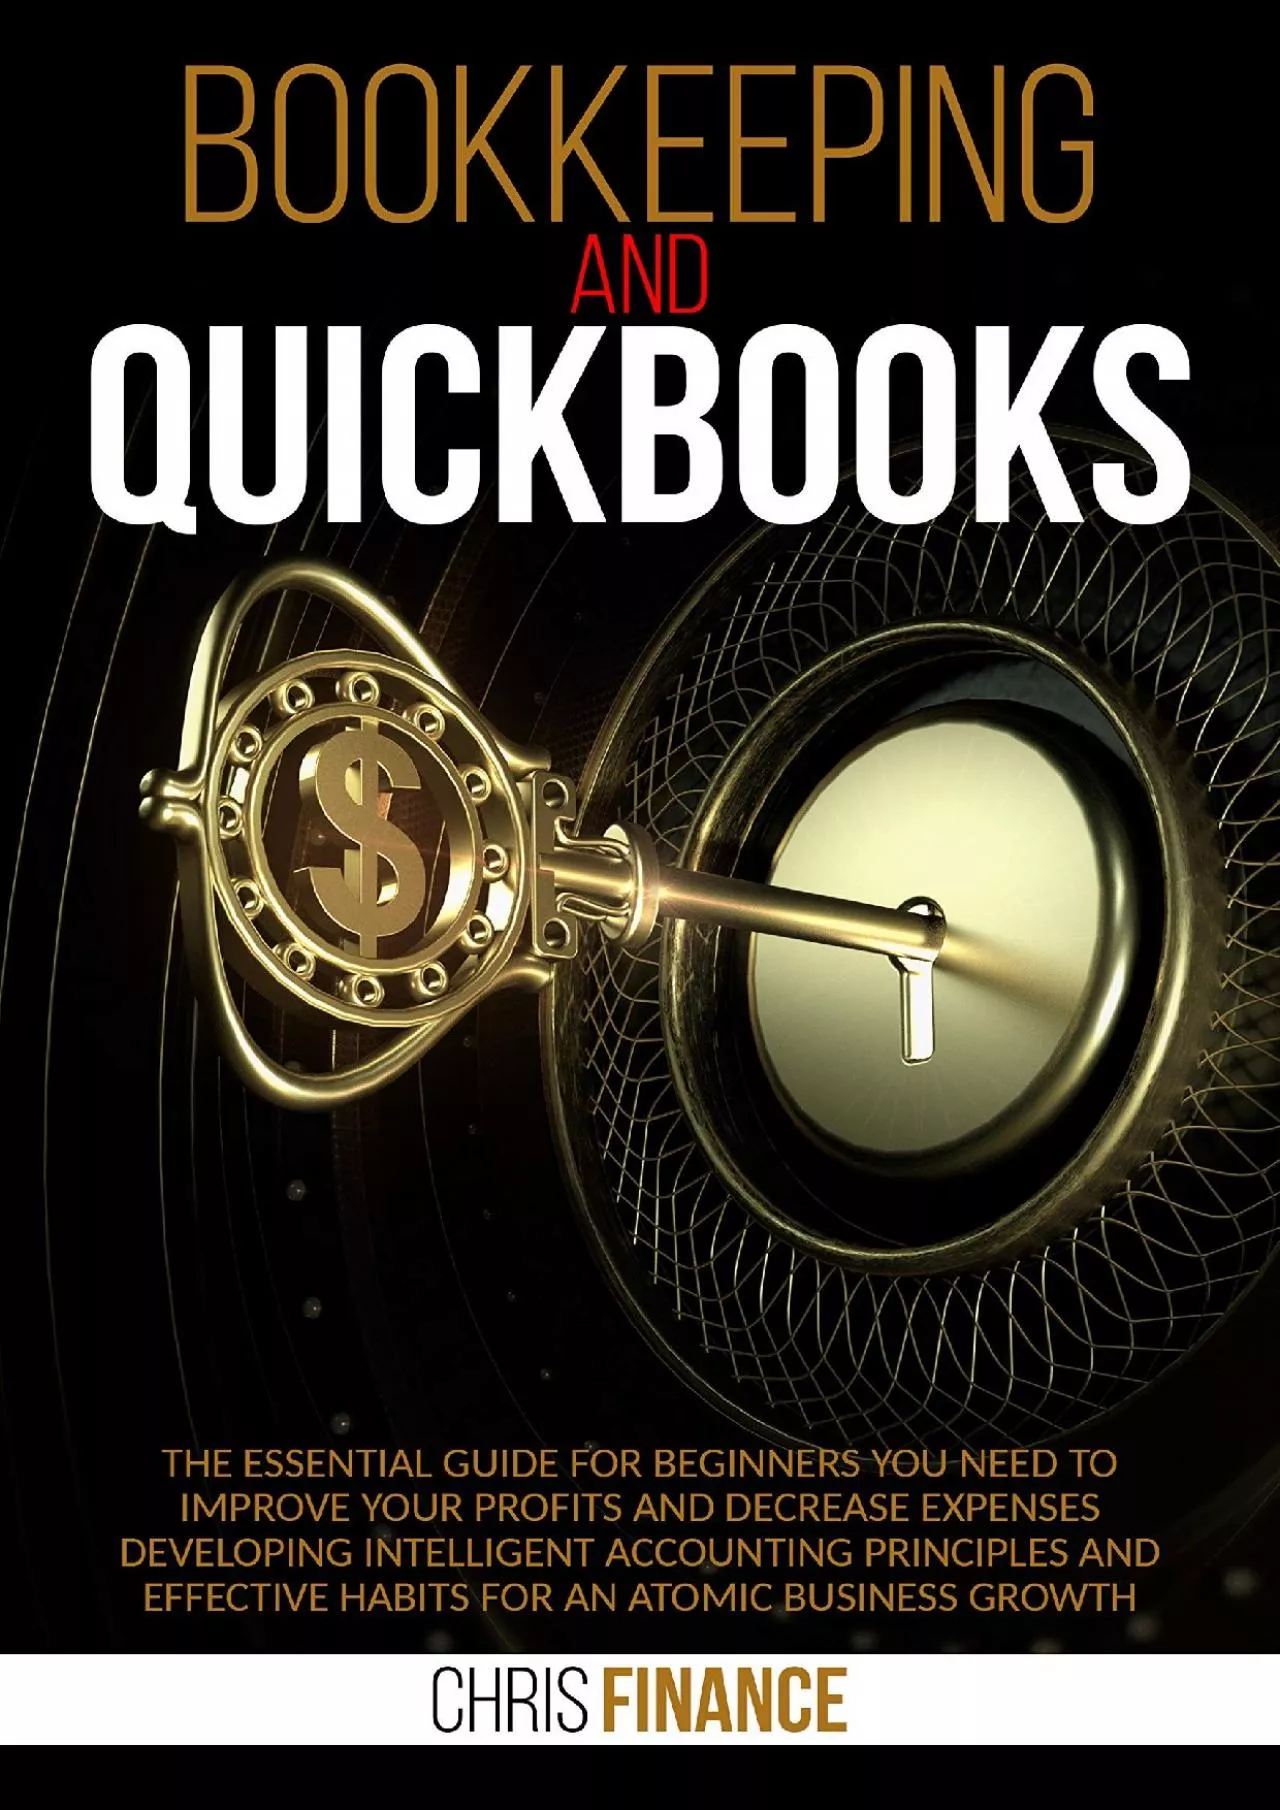 (EBOOK)-Bookkeeping and Quickbooks: The essential guide for beginners you need to improve